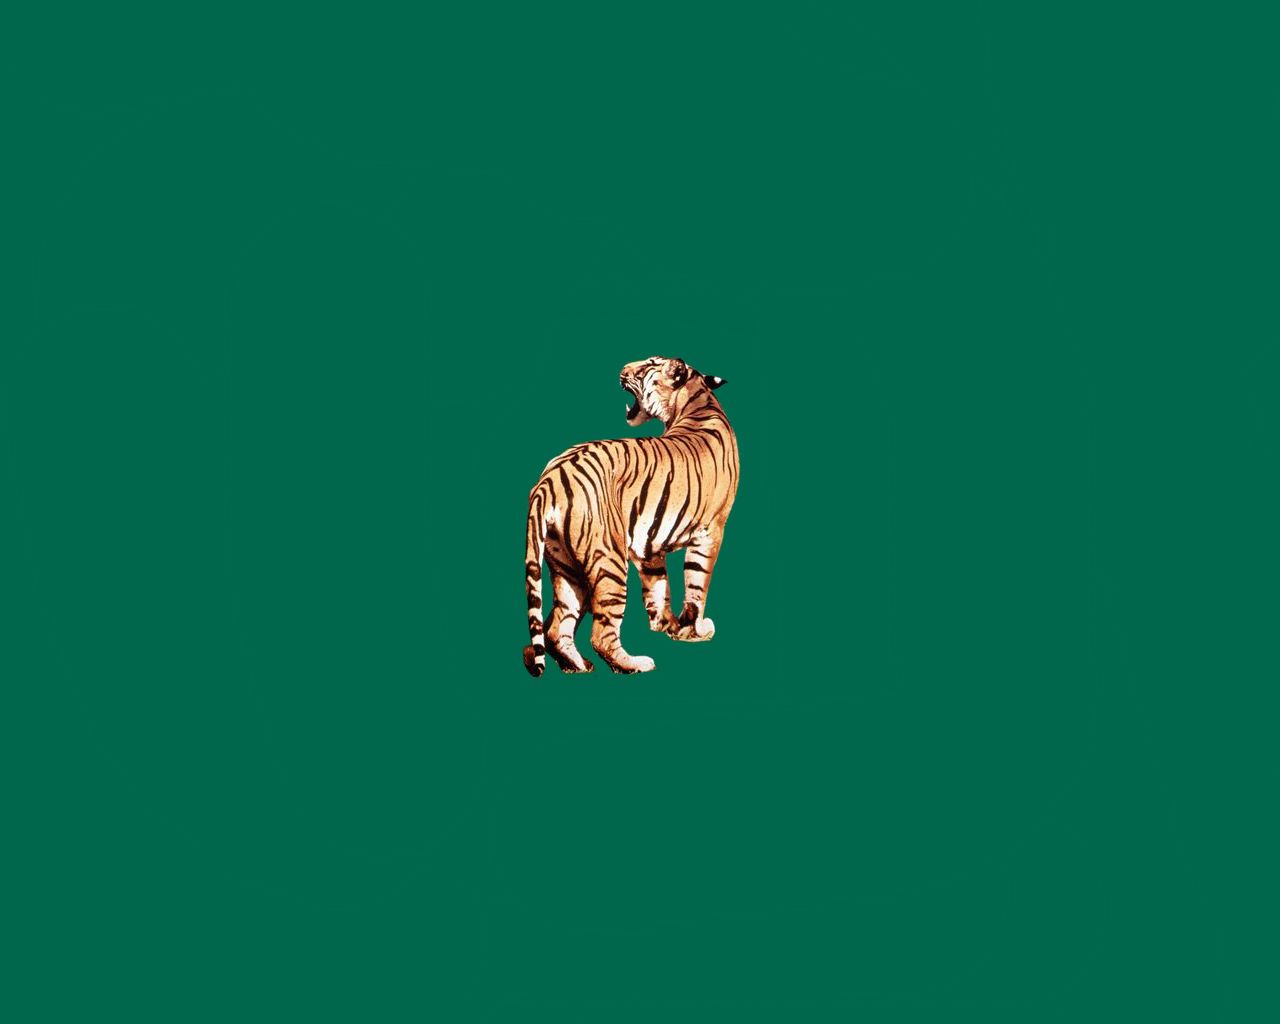 A tiger standing on a green background - Tiger